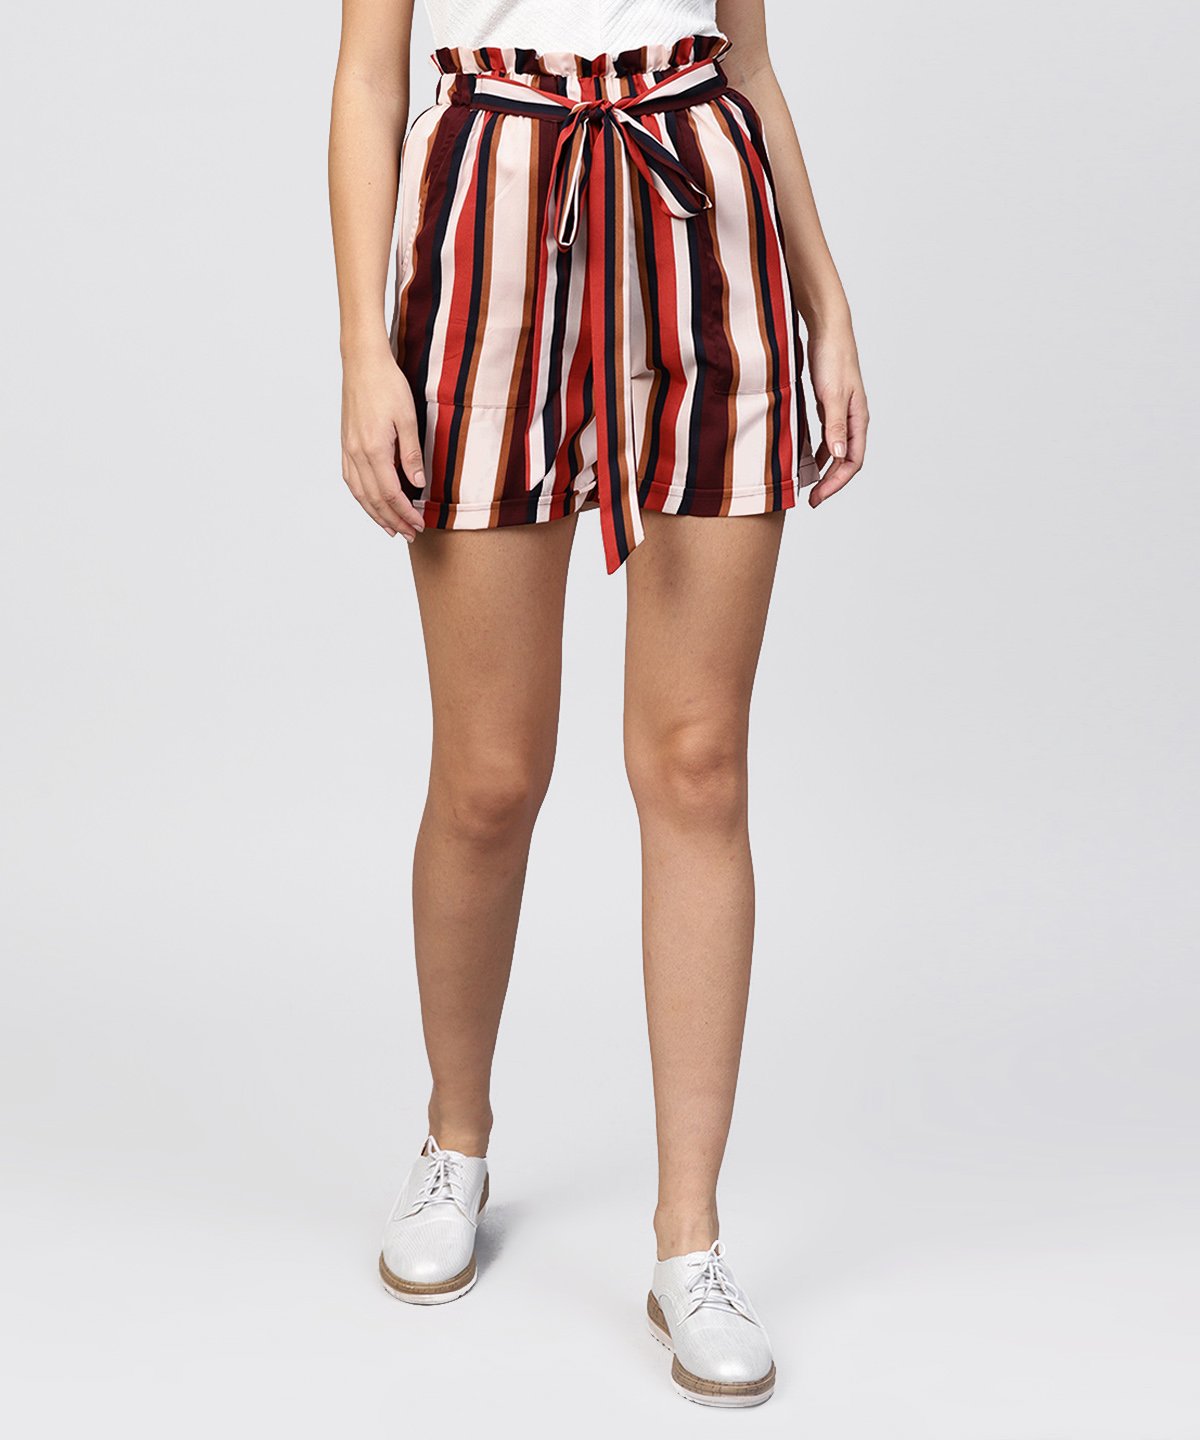 Women's Multi Colored Striped Shorts With Fabric Belt - Nayo Clothing